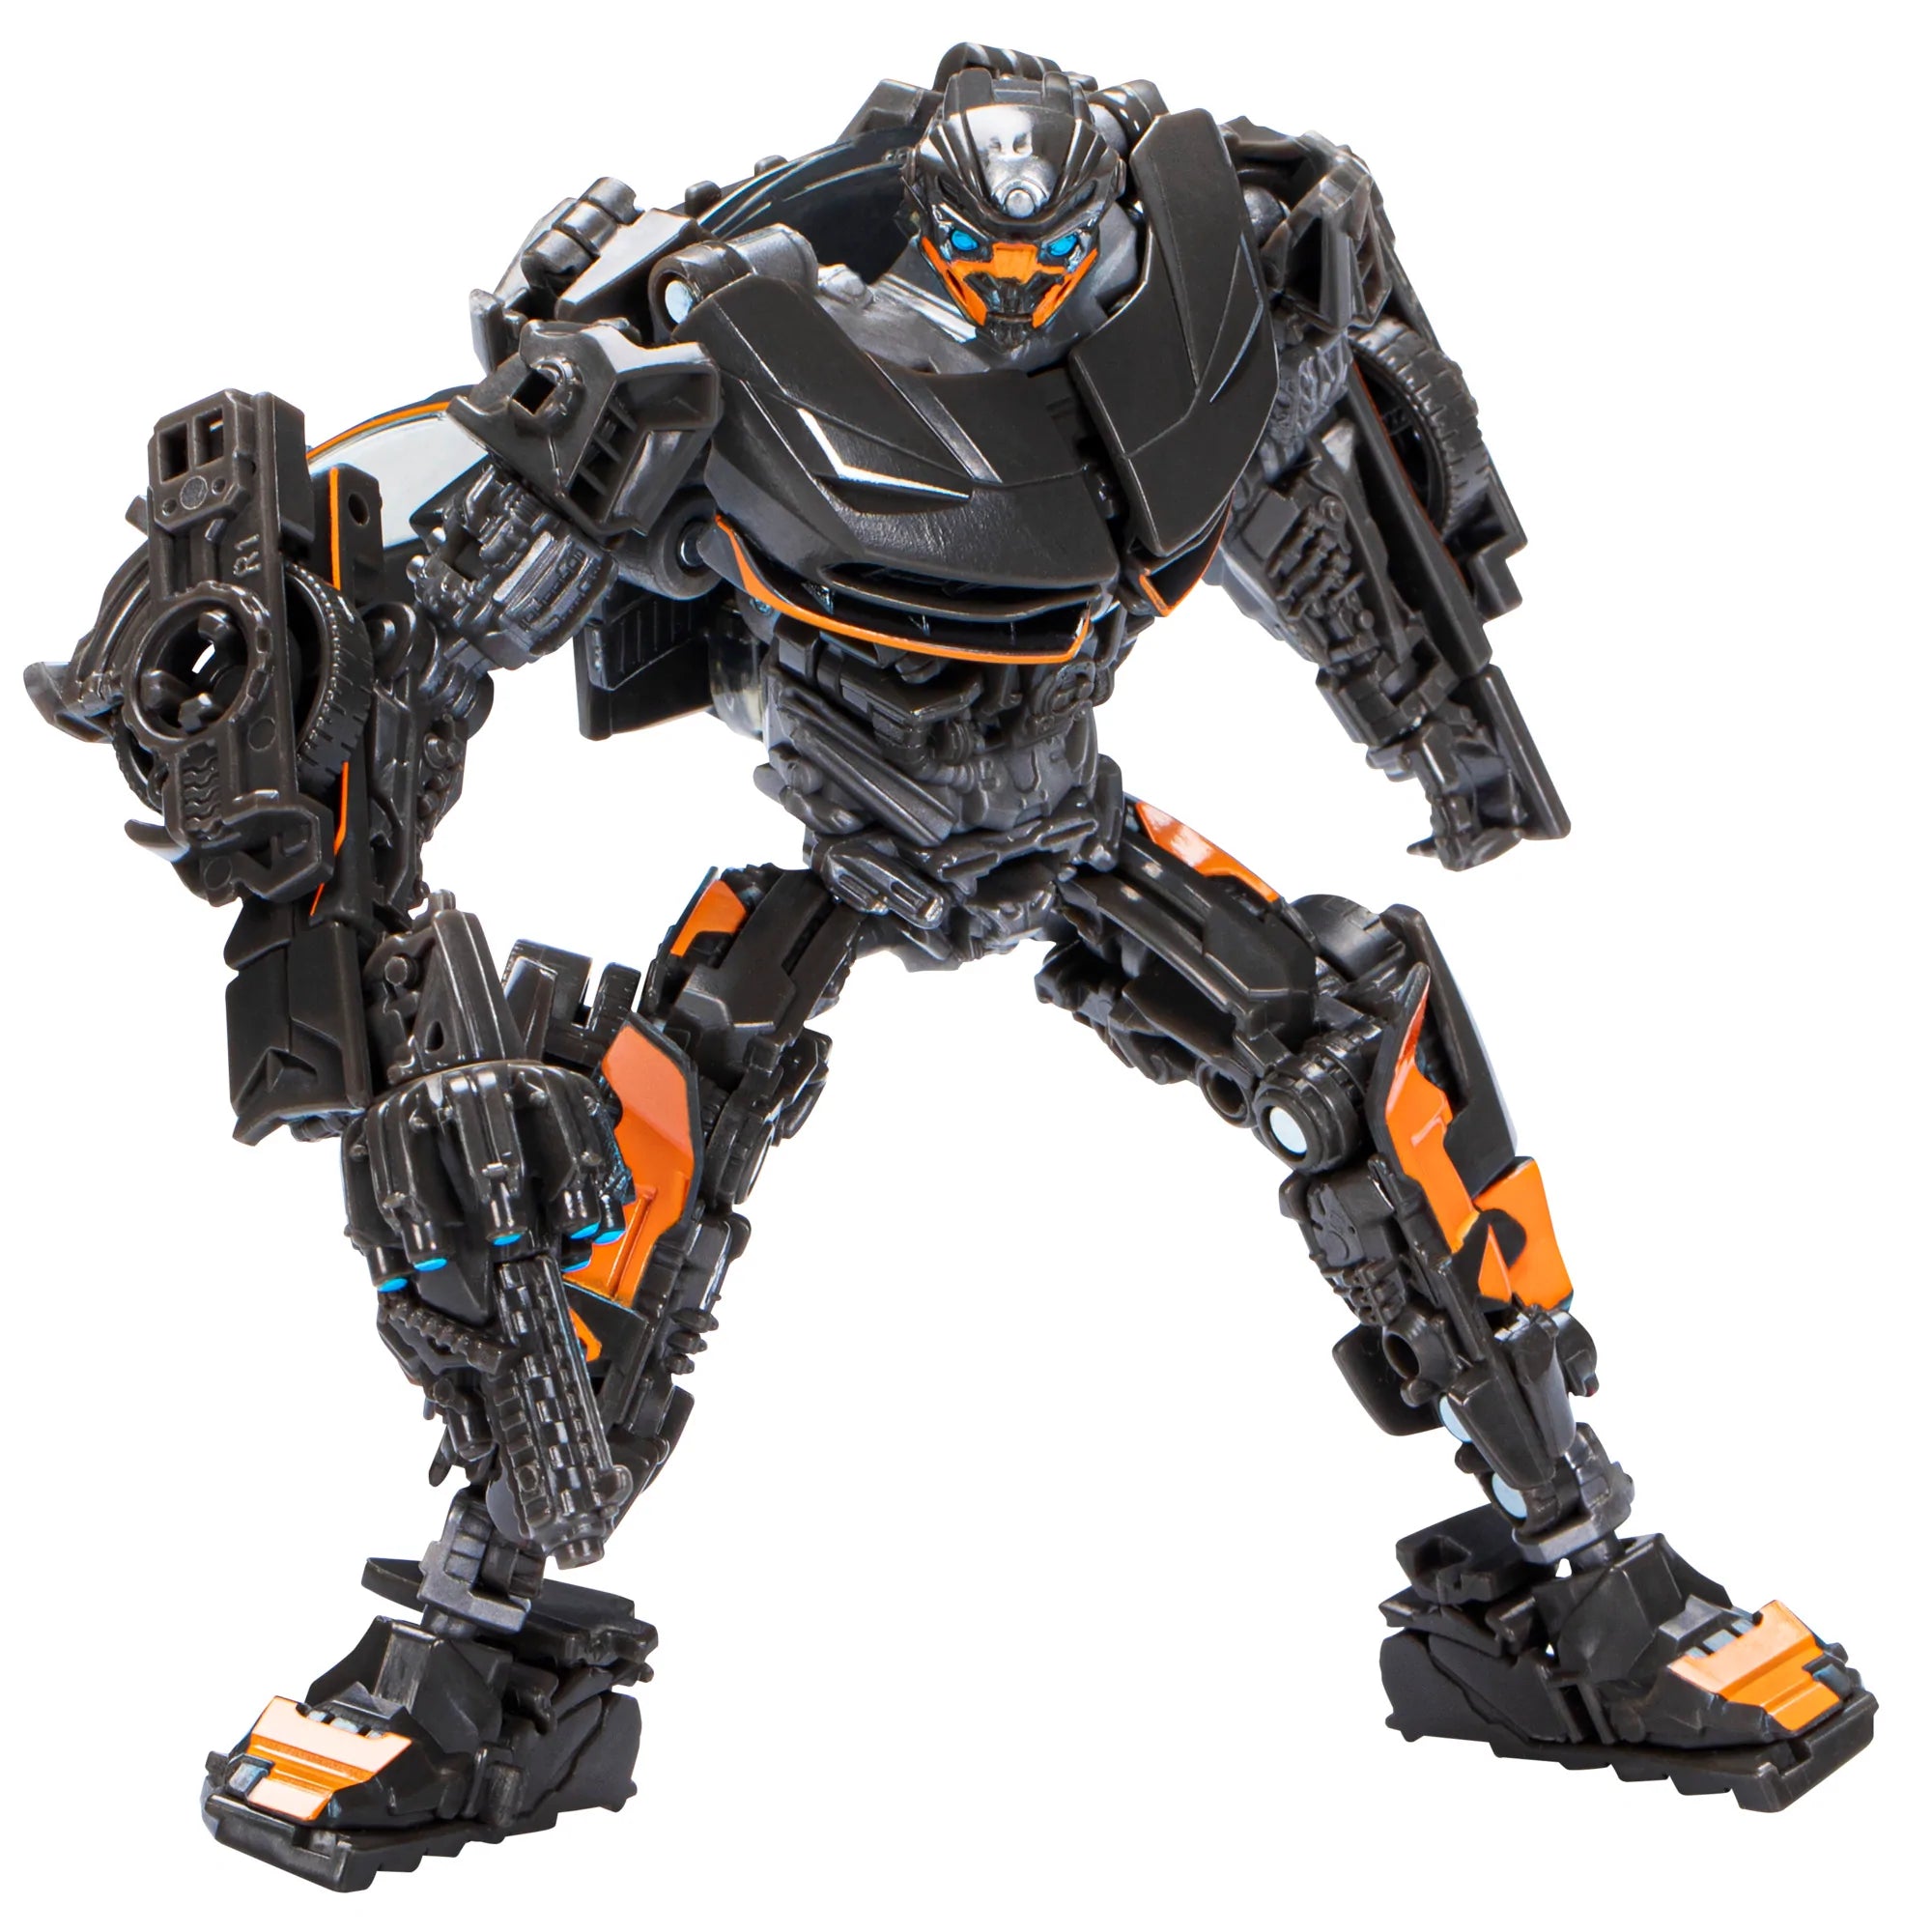 Hasbro - Transformers Generations - Studio Class 93 - Deluxe Class - Transformers: The Last Knight - Autobot Hot Rod - Marvelous Toys